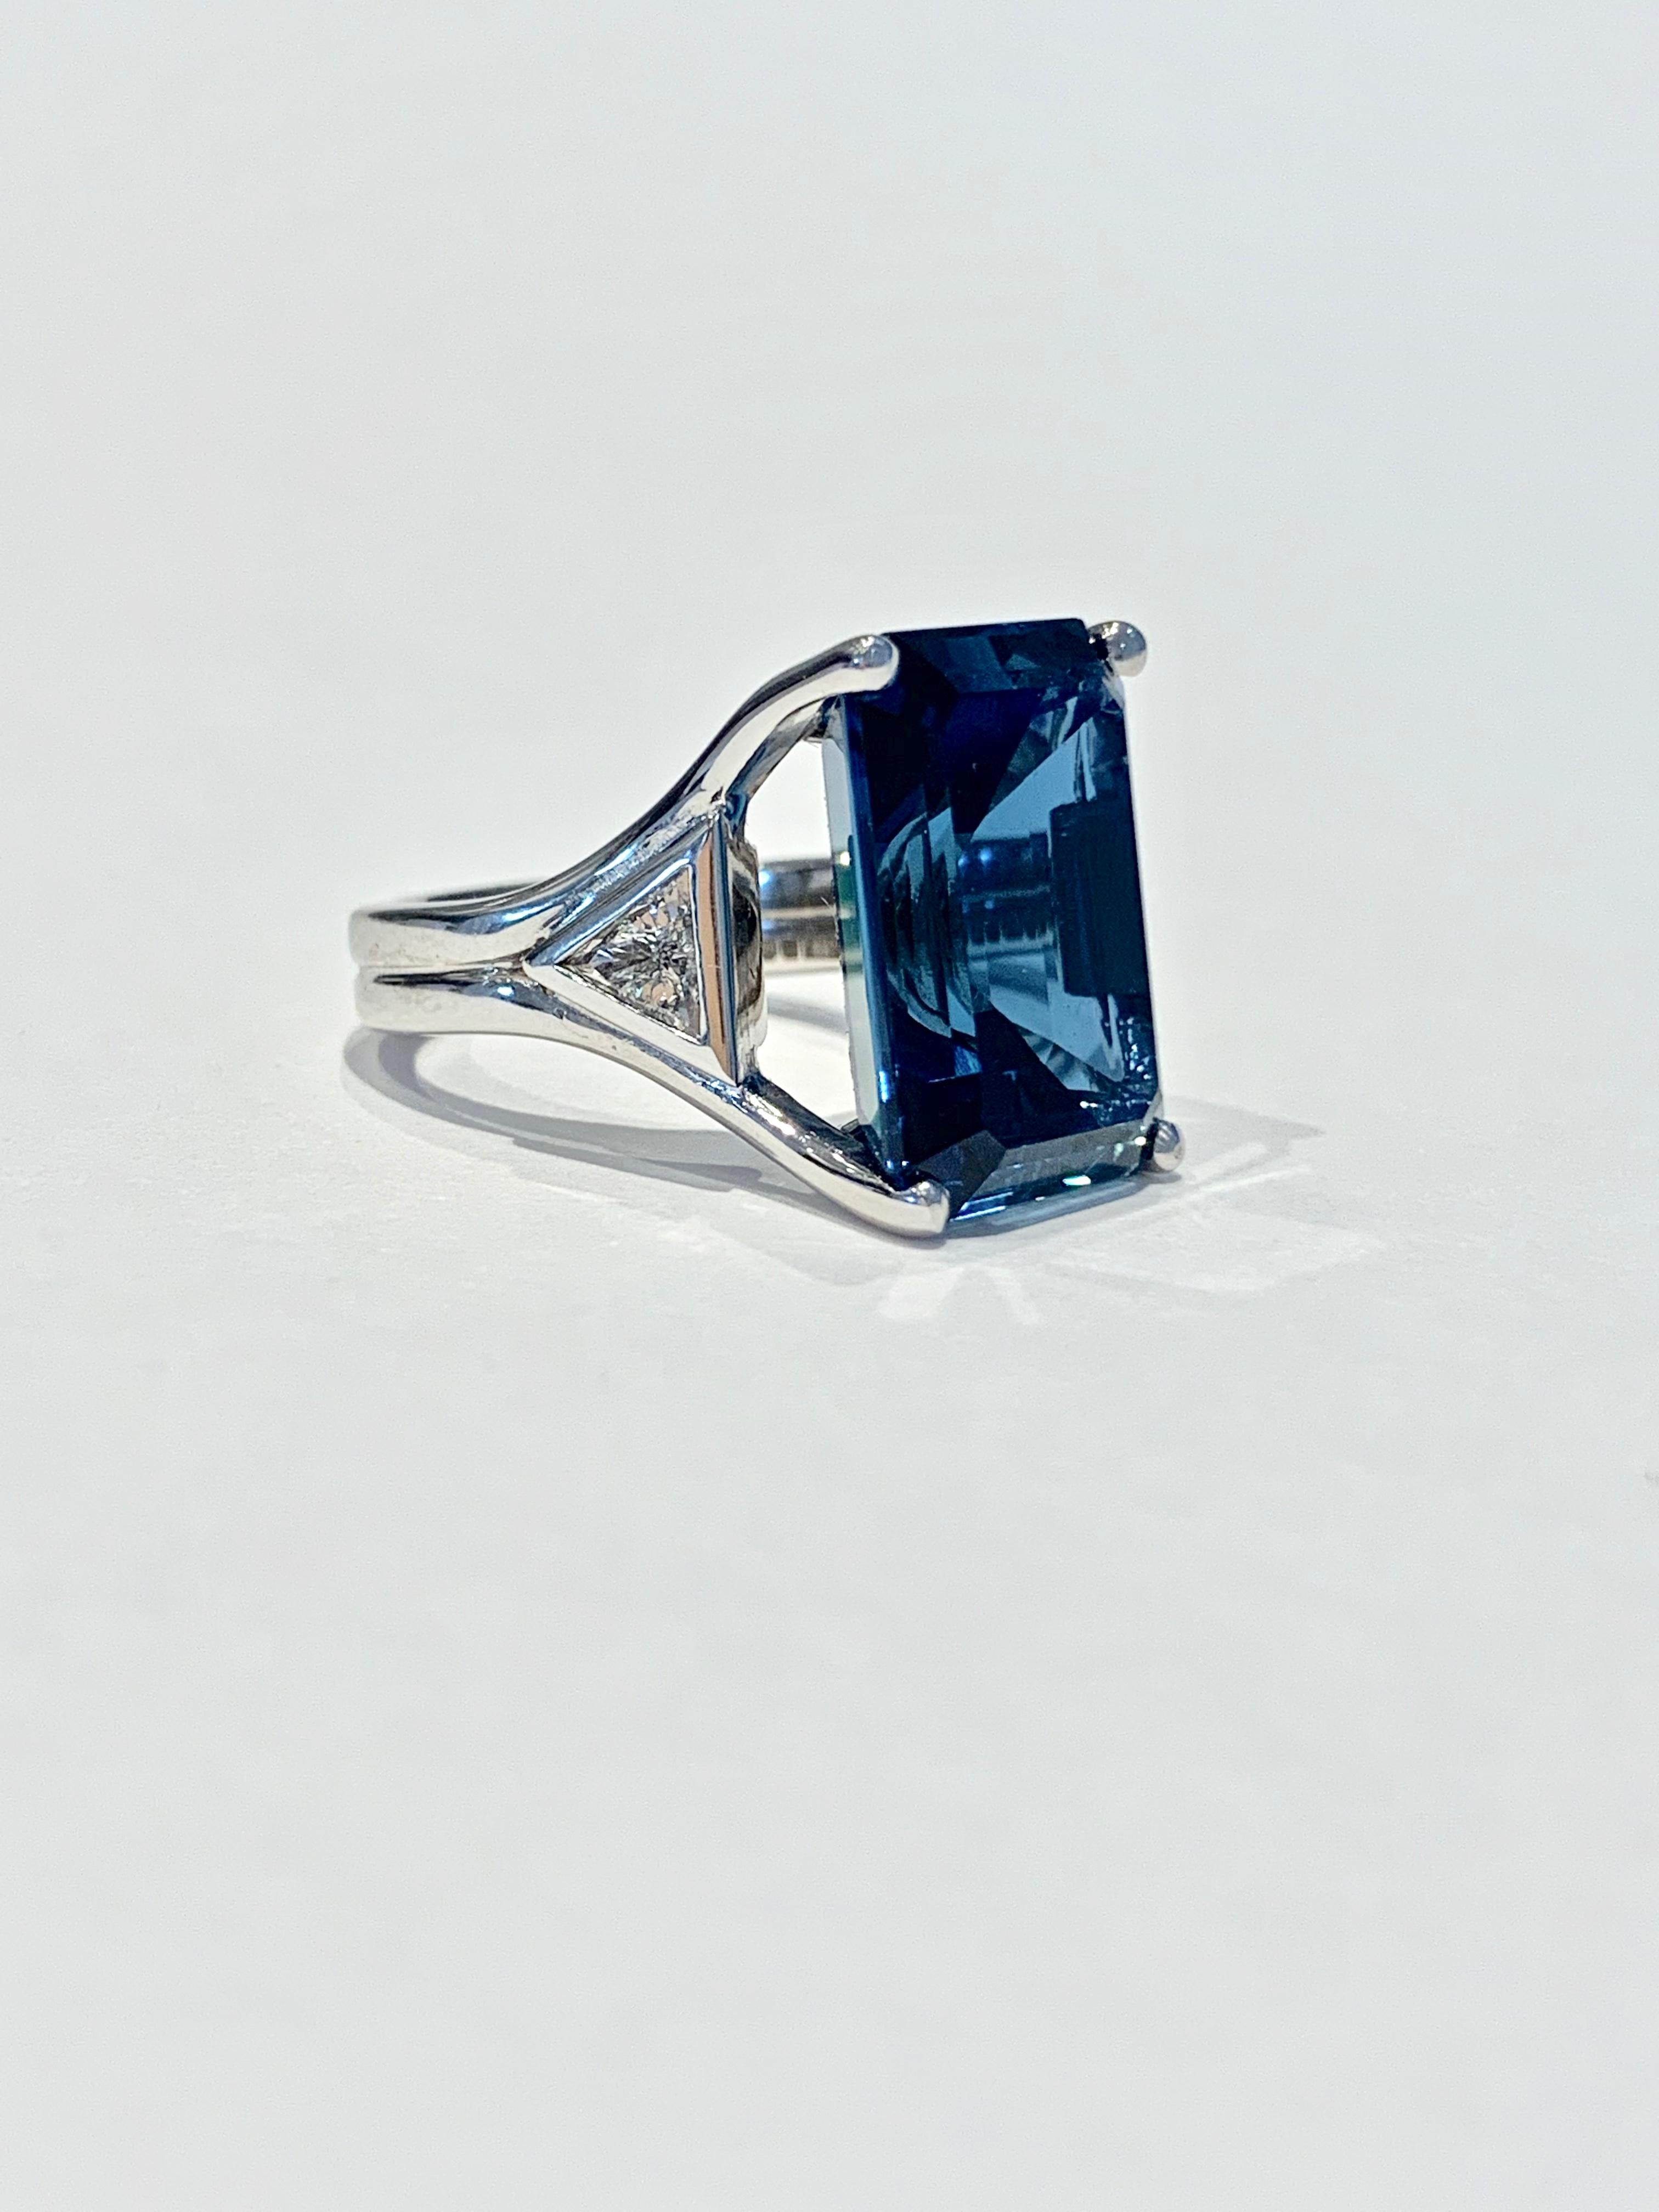 Bespoke 7.20ct Octagon Cut London Blue Topaz and Diamond Ring in 18ct White Gold In New Condition For Sale In Chislehurst, Kent